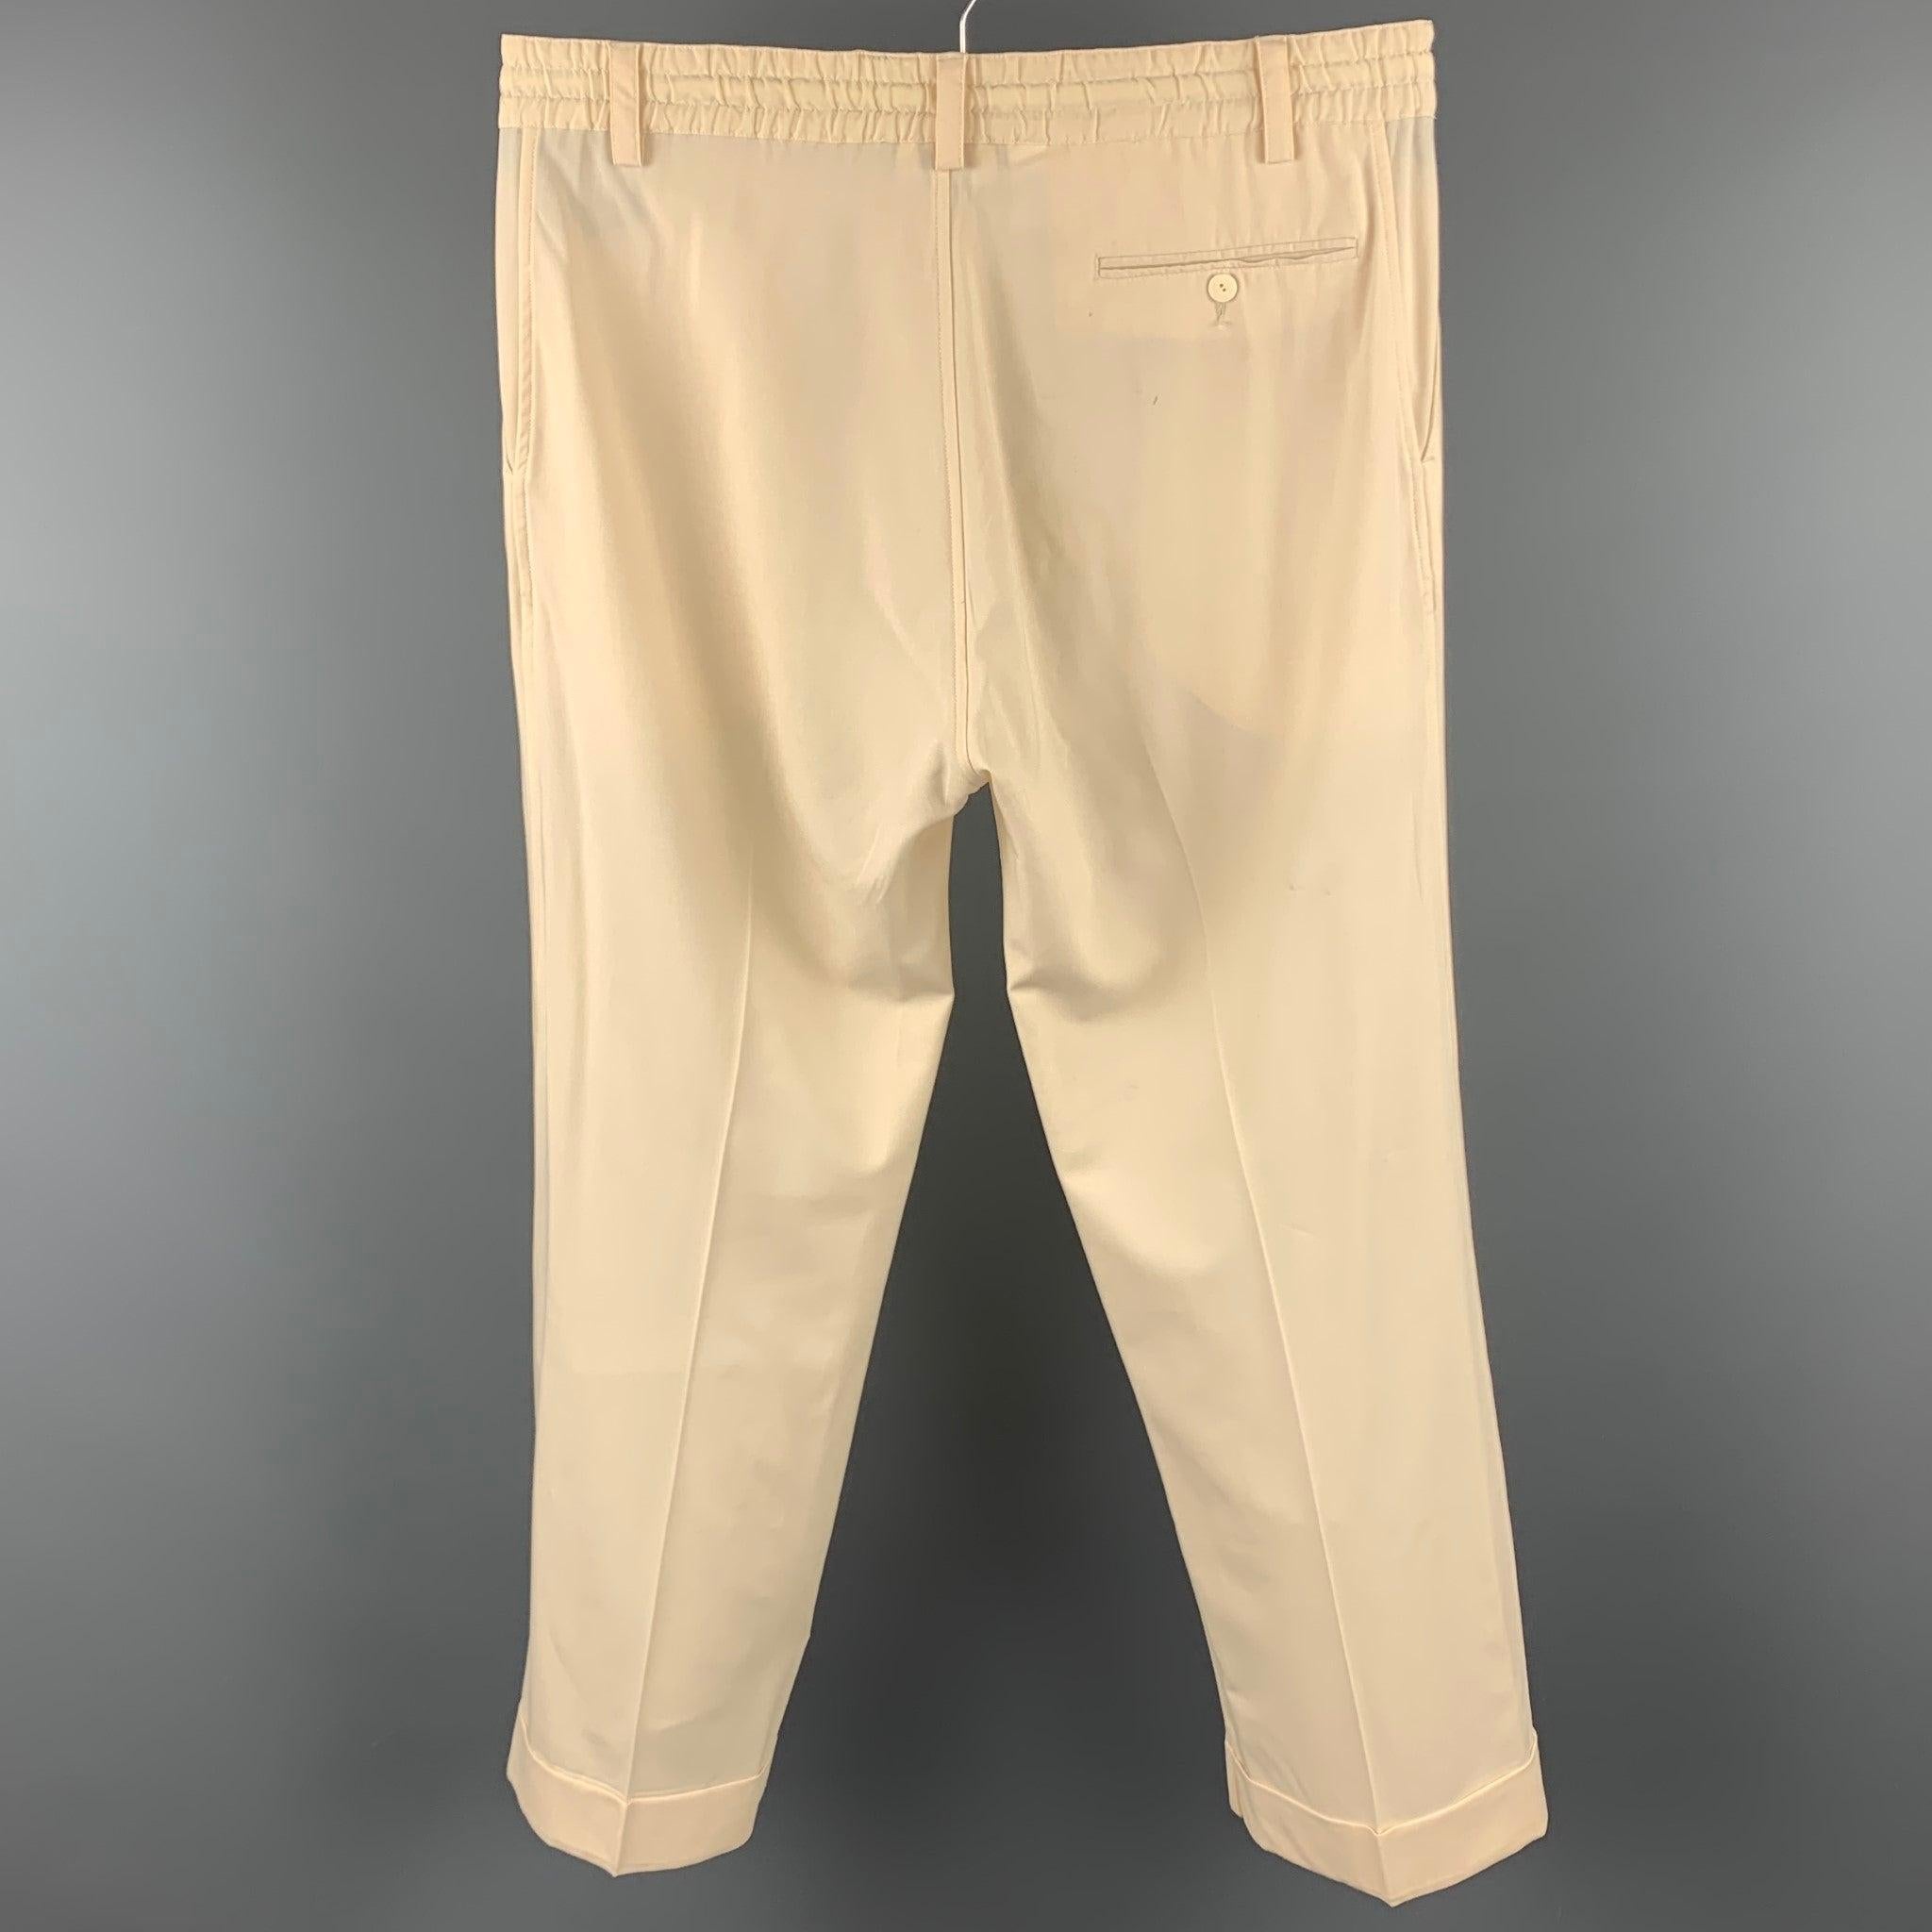 JEAN PAUL GAULTIER casual pants comes in a cream wool blend featuring a straight leg, drawstring, slit pockets, cuffed leg, and a button fly closure. Moderate wear. Made in Italy.Good
 Pre-Owned Condition. 
 

 Marked:  M 
 

 Measurements: 
 